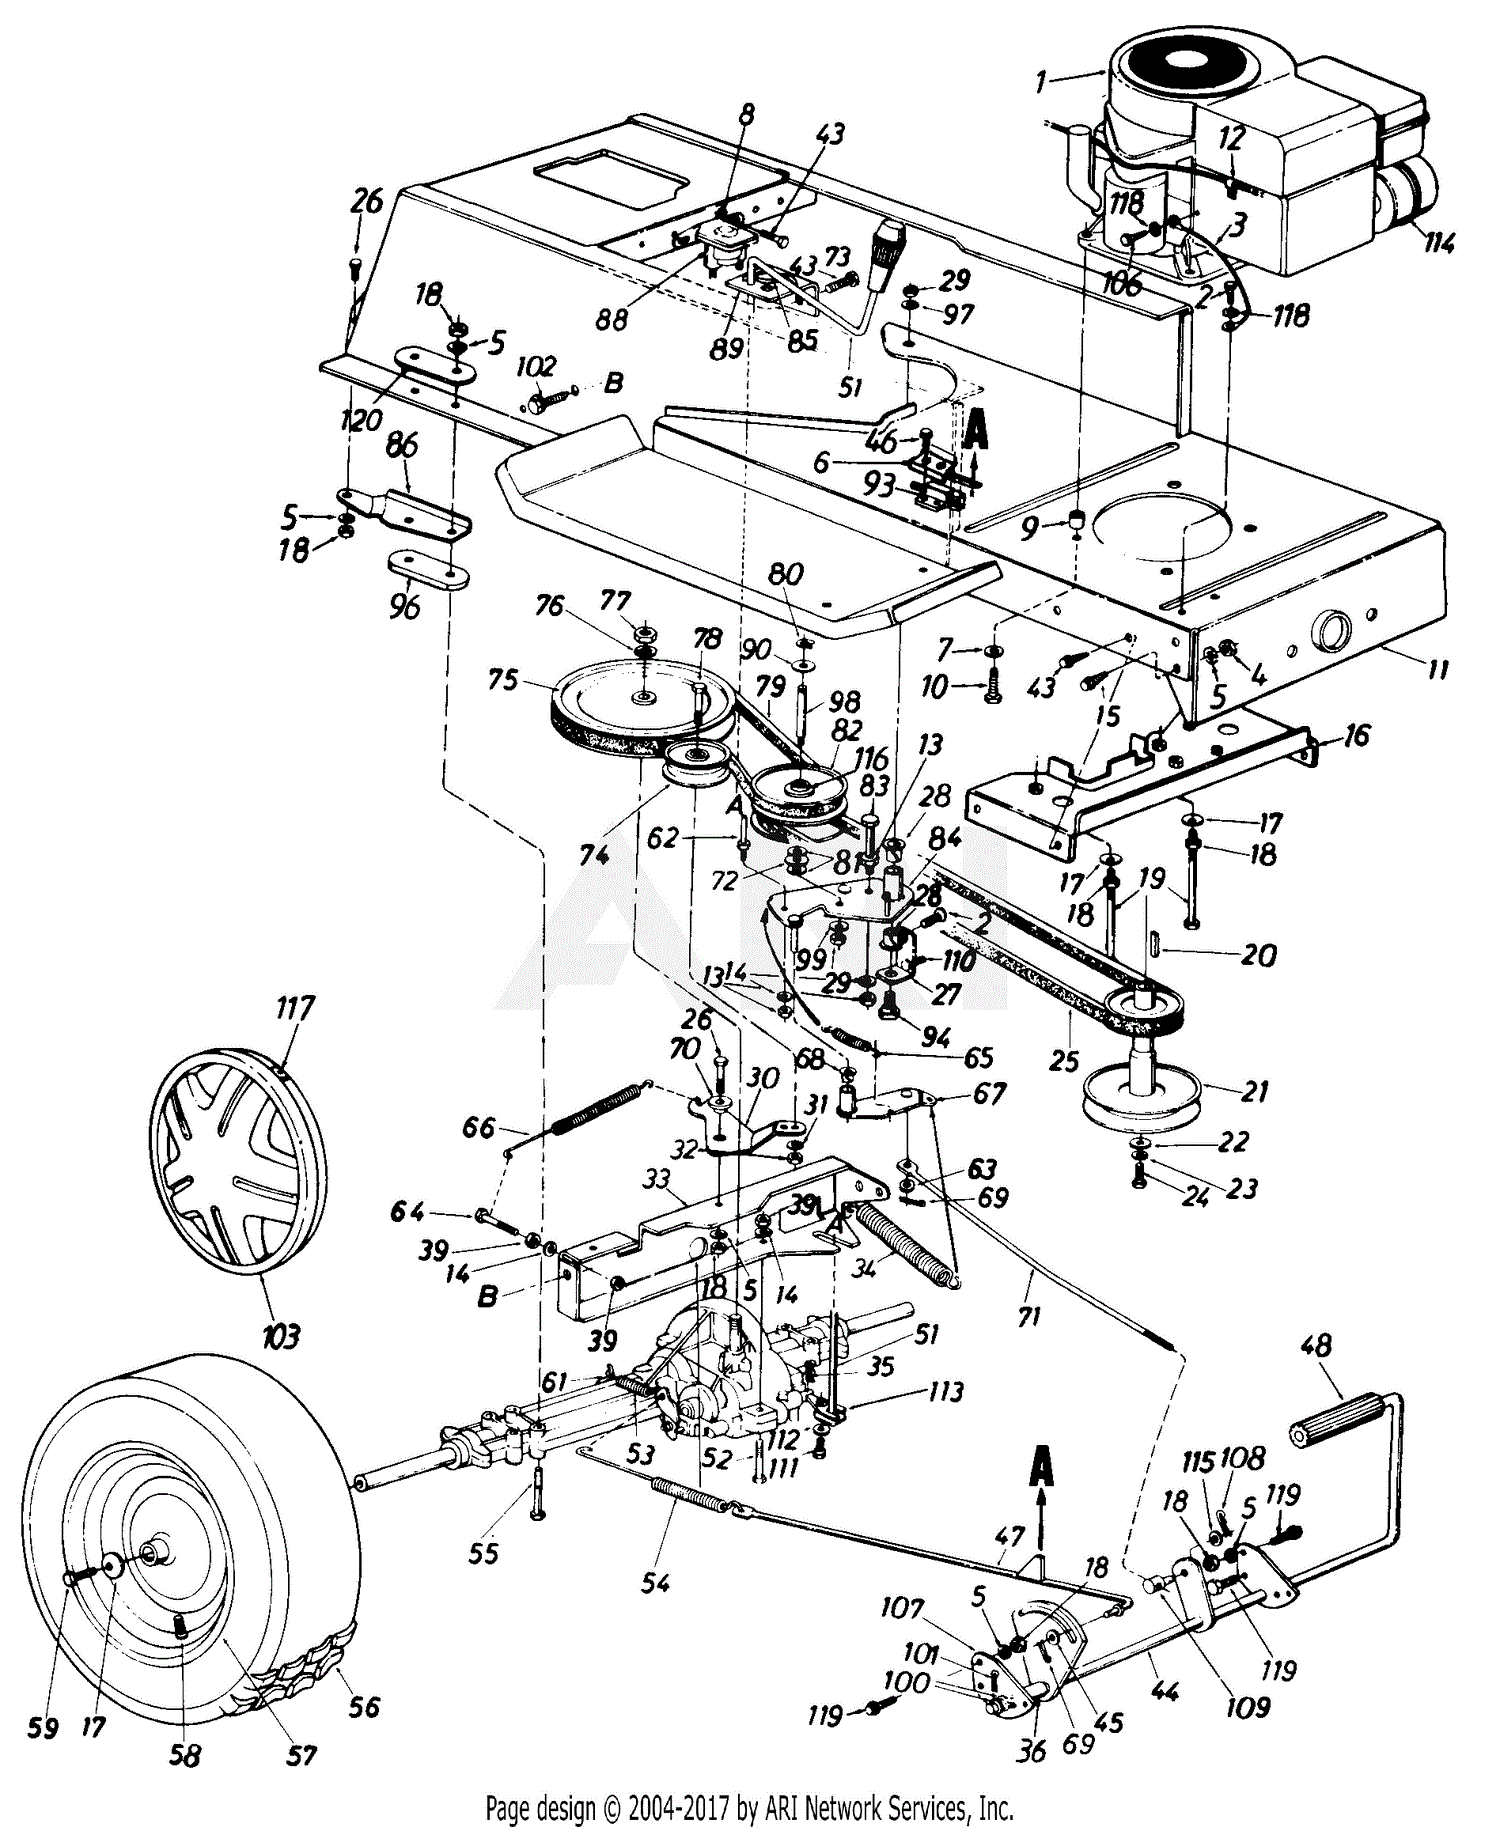 Wiring Diagram For Mtd Riding Lawn Mower from az417944.vo.msecnd.net